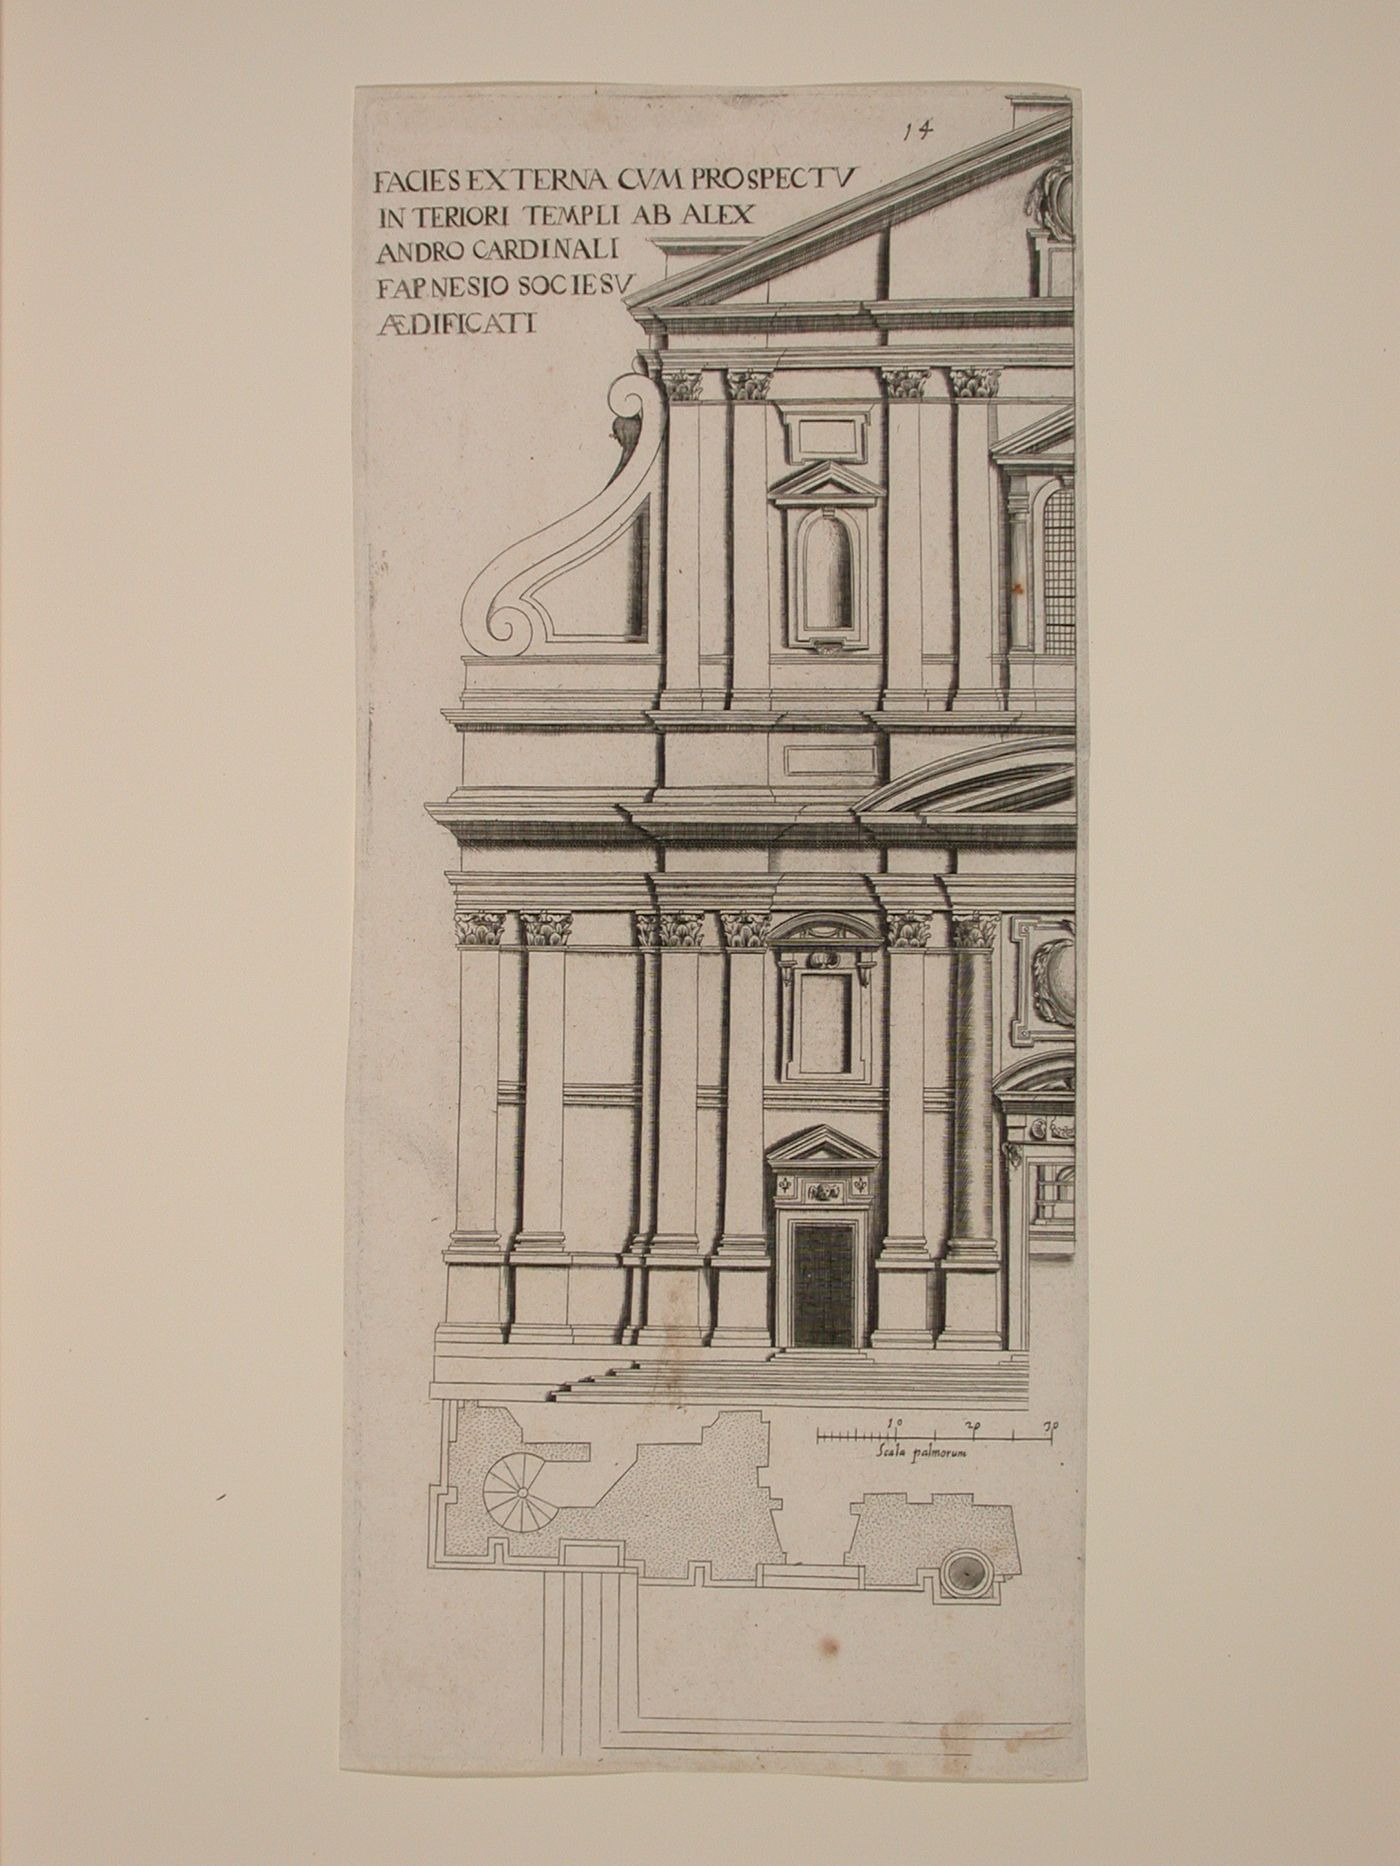 Half-plan and half-elevation of the façade of Il Gesù, Rome